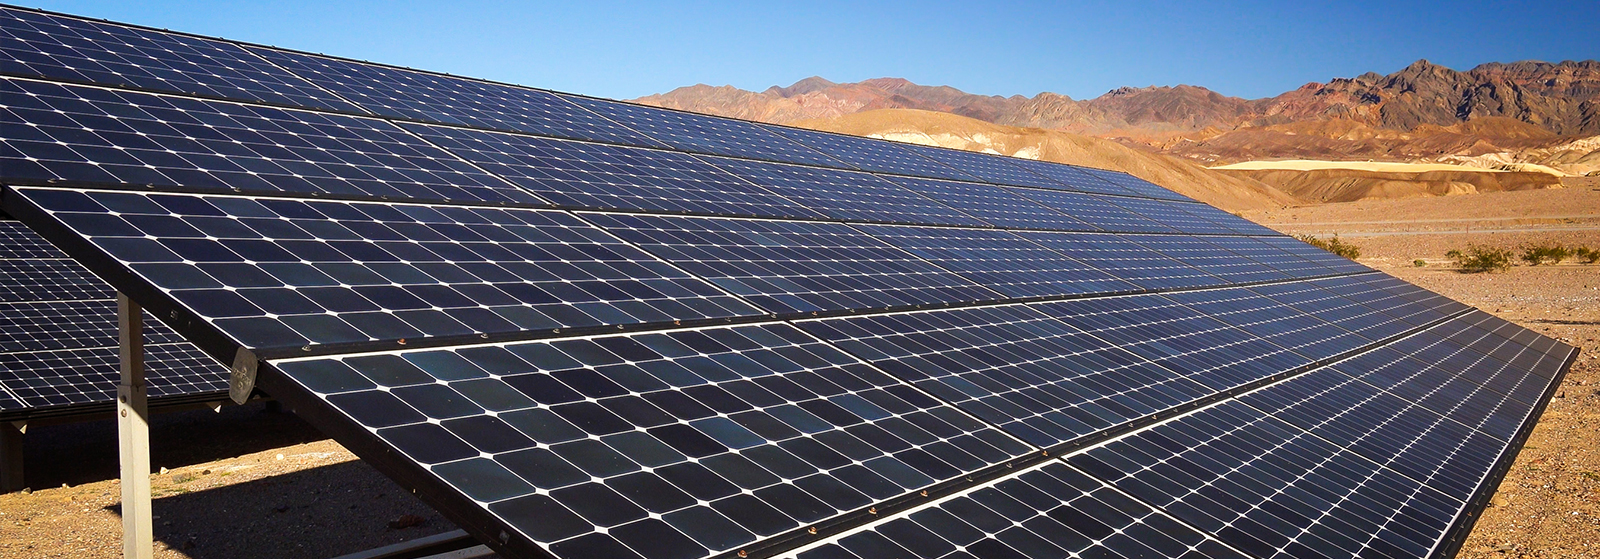 Solar panels in the middle of Arizona desert land powers local communities.